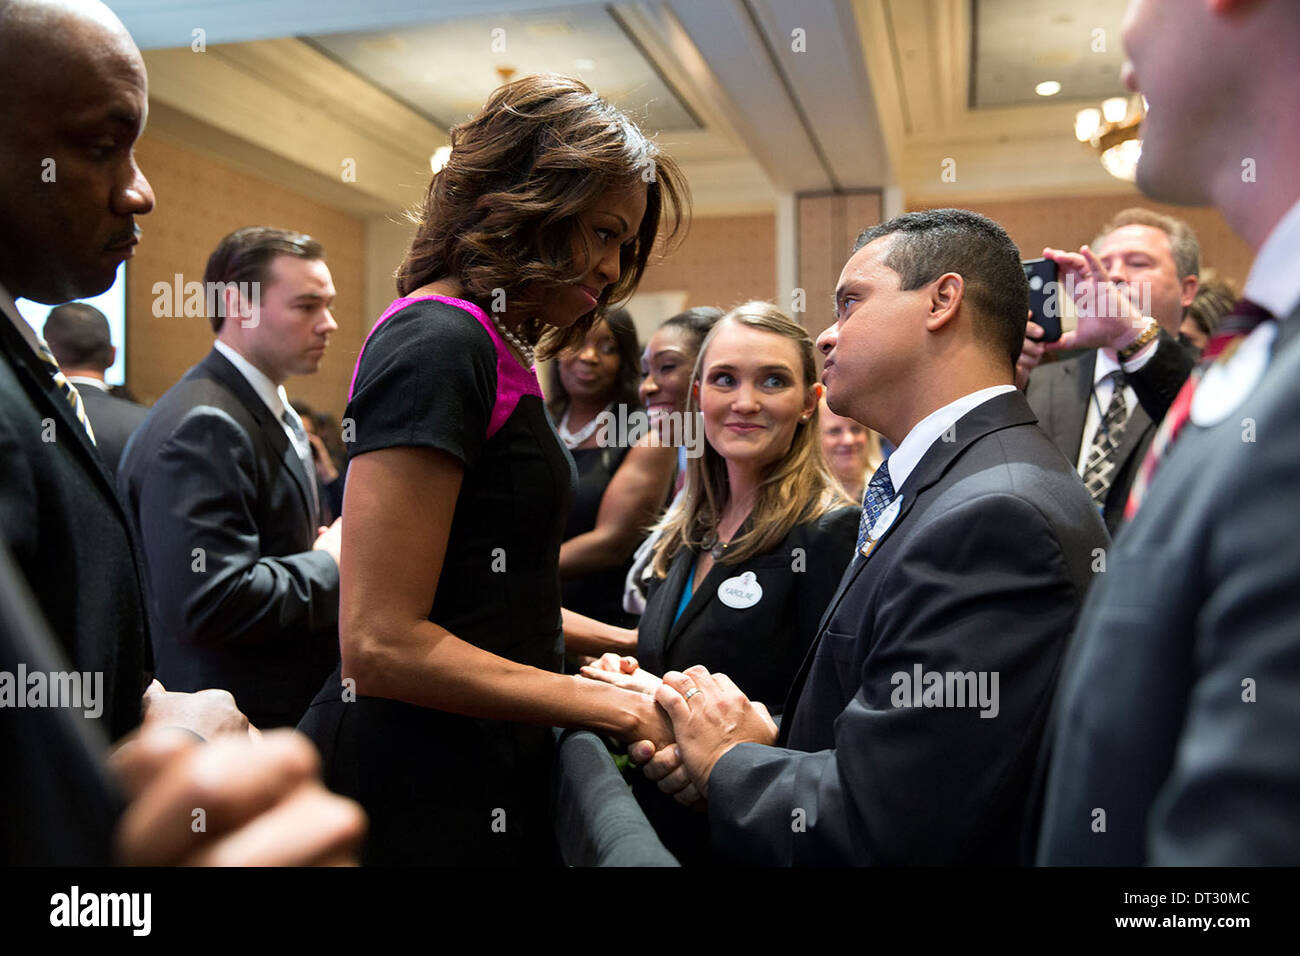 US First Lady Michelle Obama greets attendees after she delivers the keynote address at Disney's Veterans Institute Workshop at the Walt Disney World Resort November 14, 2013 in Orlando, FL. Stock Photo